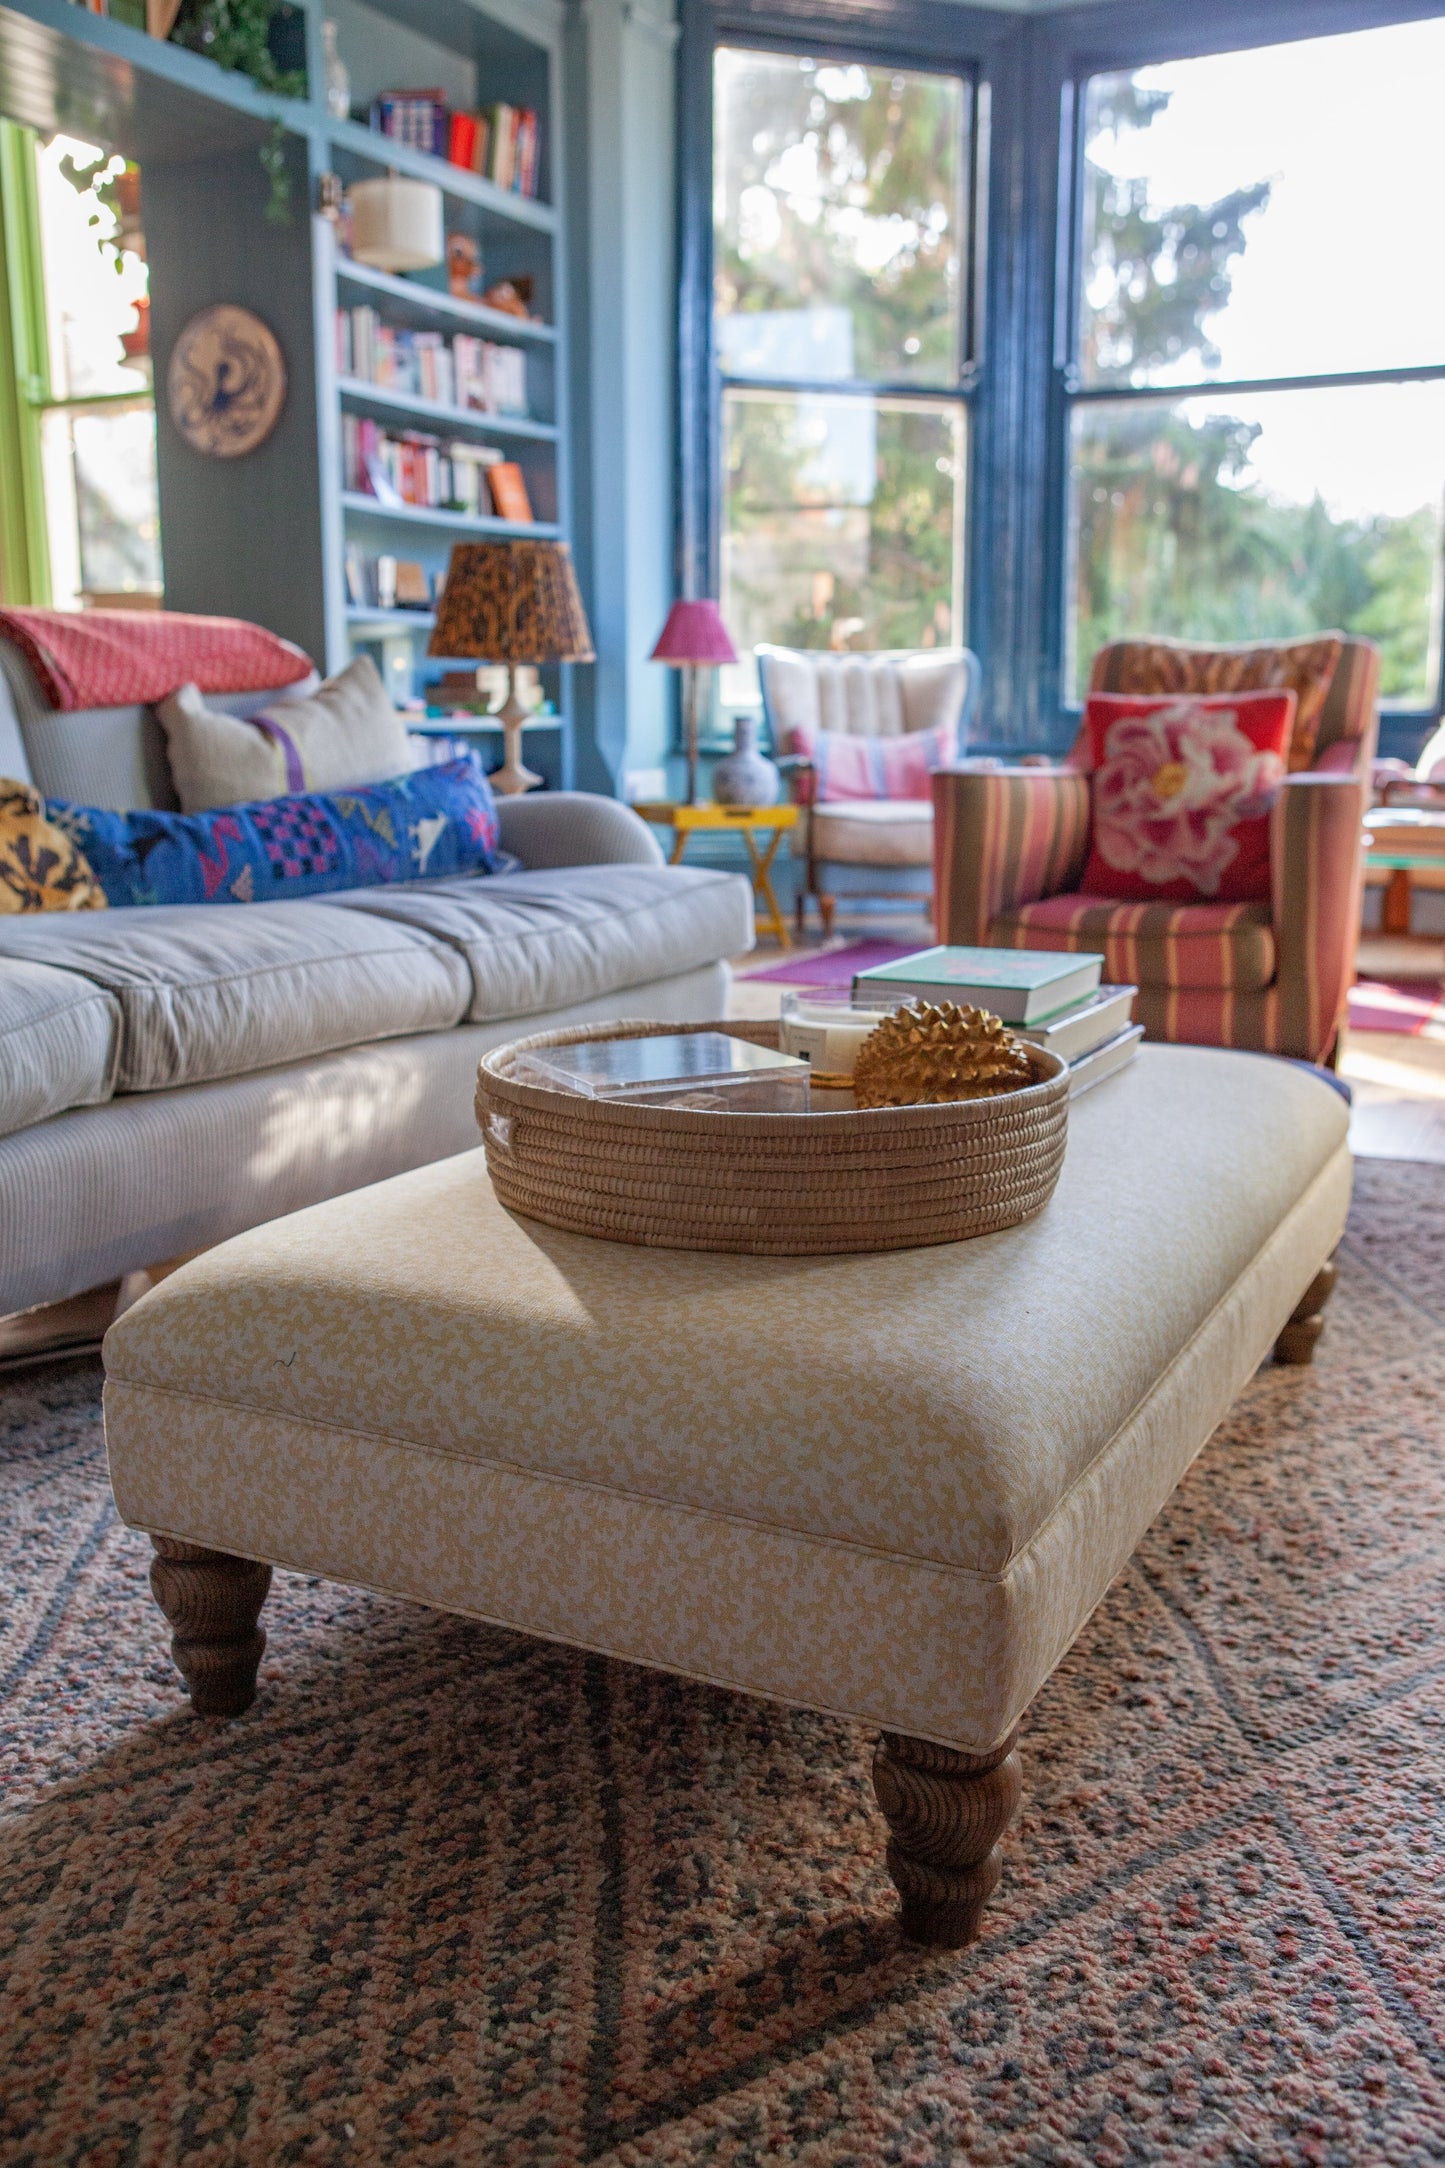 Our Bryher ottoman footstool